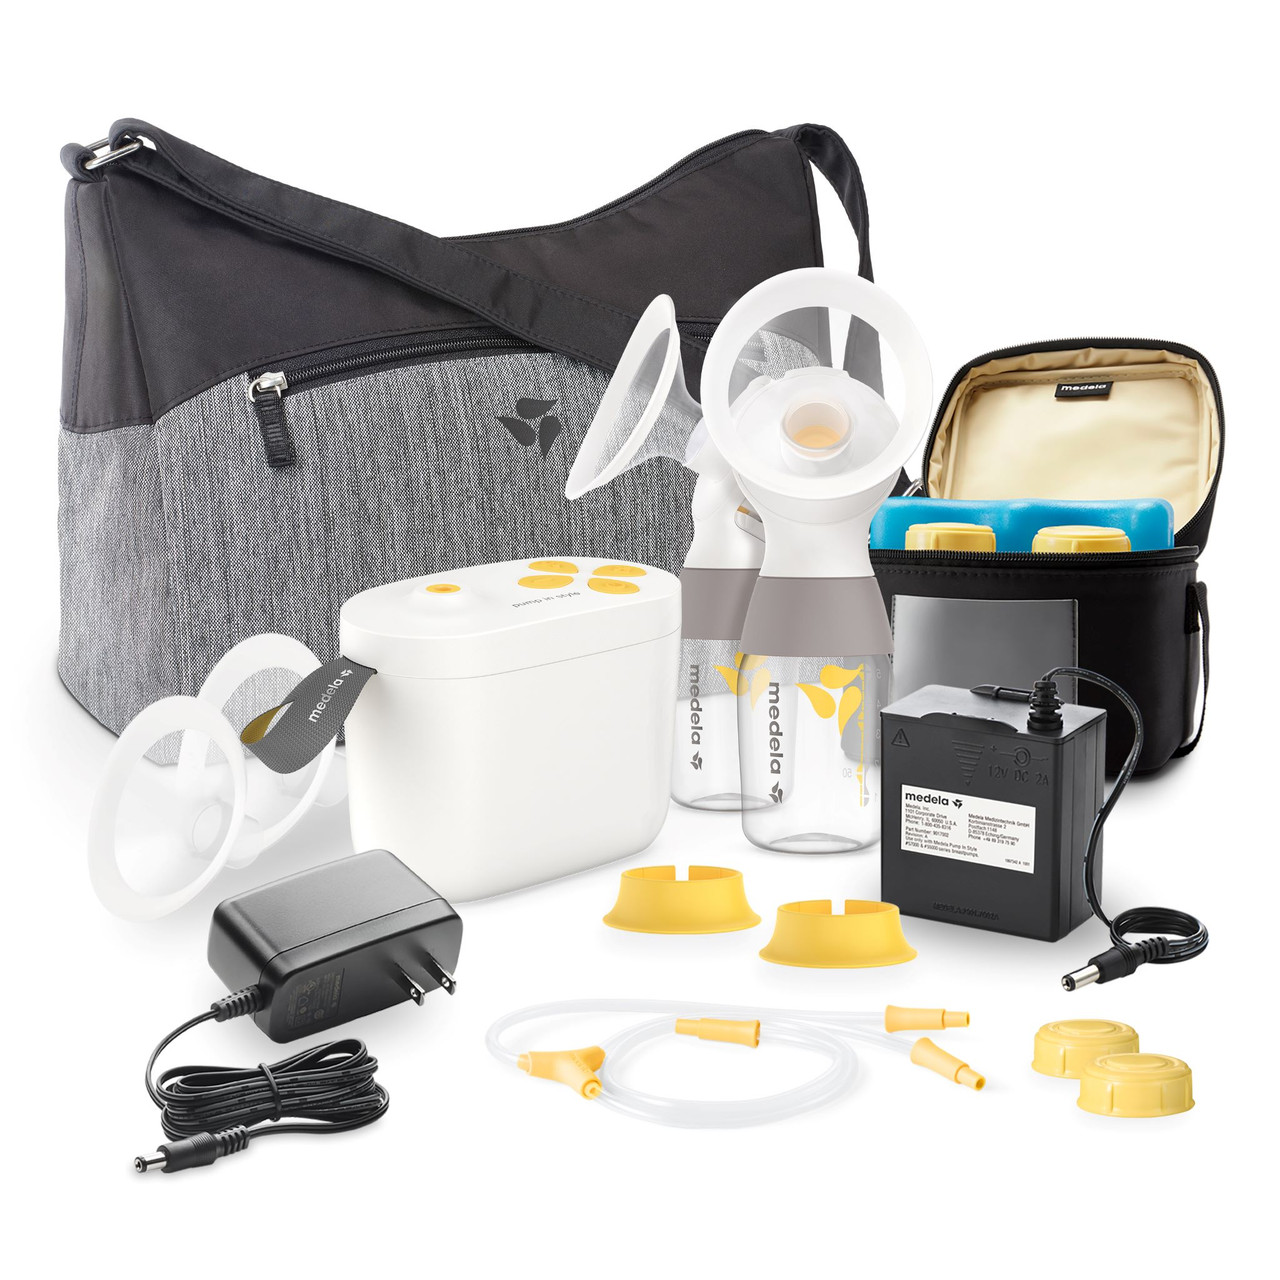  Medela Pump in Style Advanced Double Pumping Kit with  Authentic Medela Spare Parts, Includes Breast Shields, Connectors, and  Accessory Bag, Made Without BPA : Breast Feeding Supplies : Baby